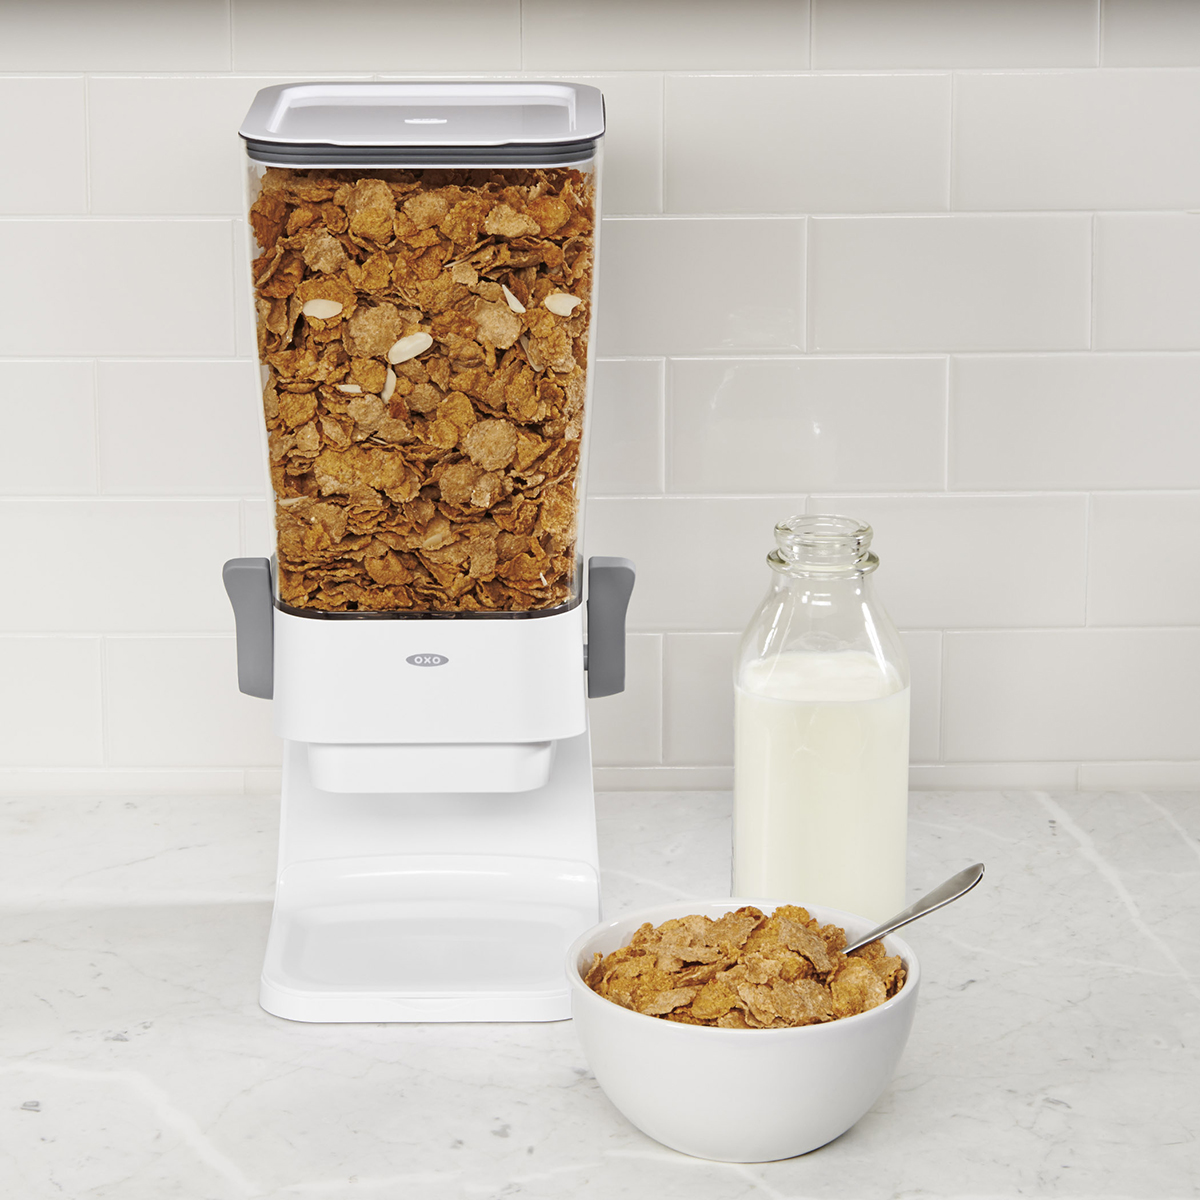 https://www.containerstore.com/catalogimages/424787/10086156-OXO-Countertop-Cereal-Dispe.jpg